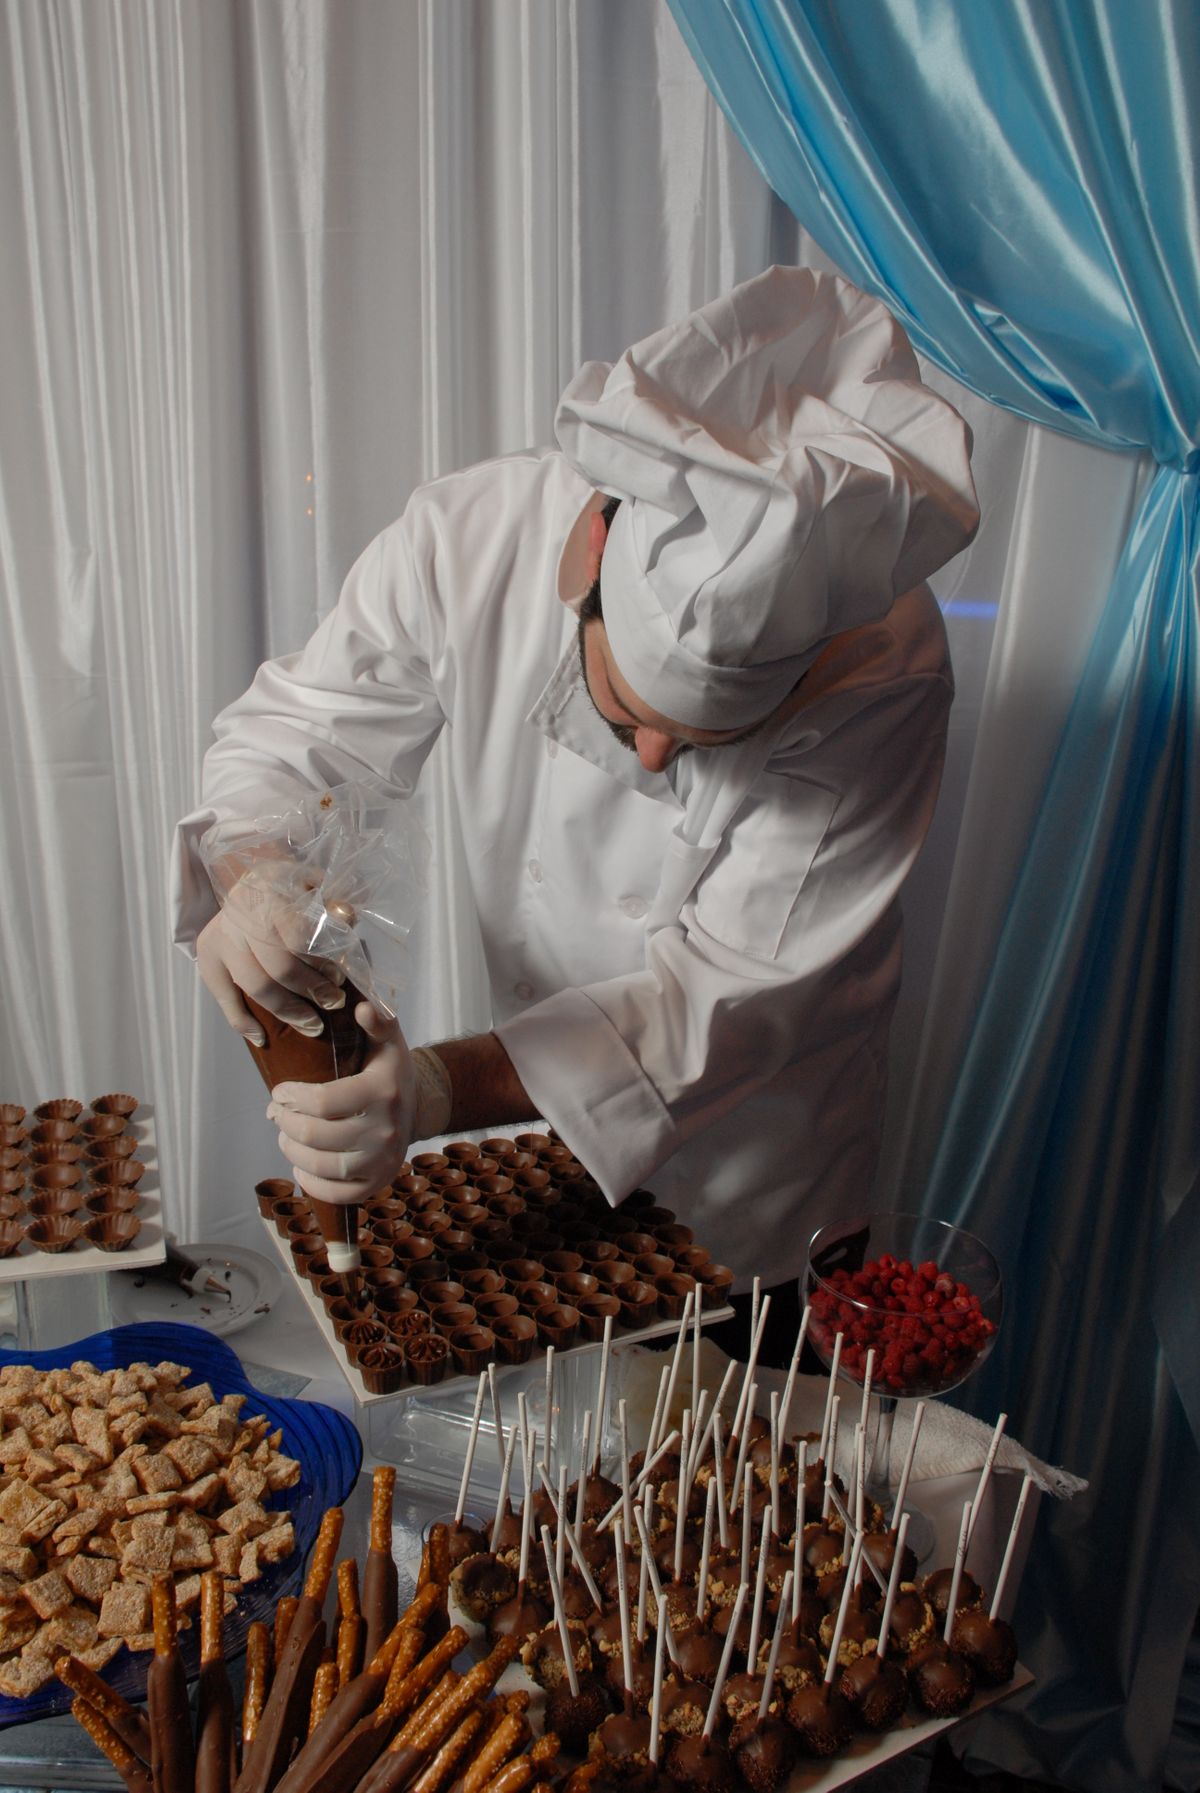 Copy of Hand Piped Truffles.jpg